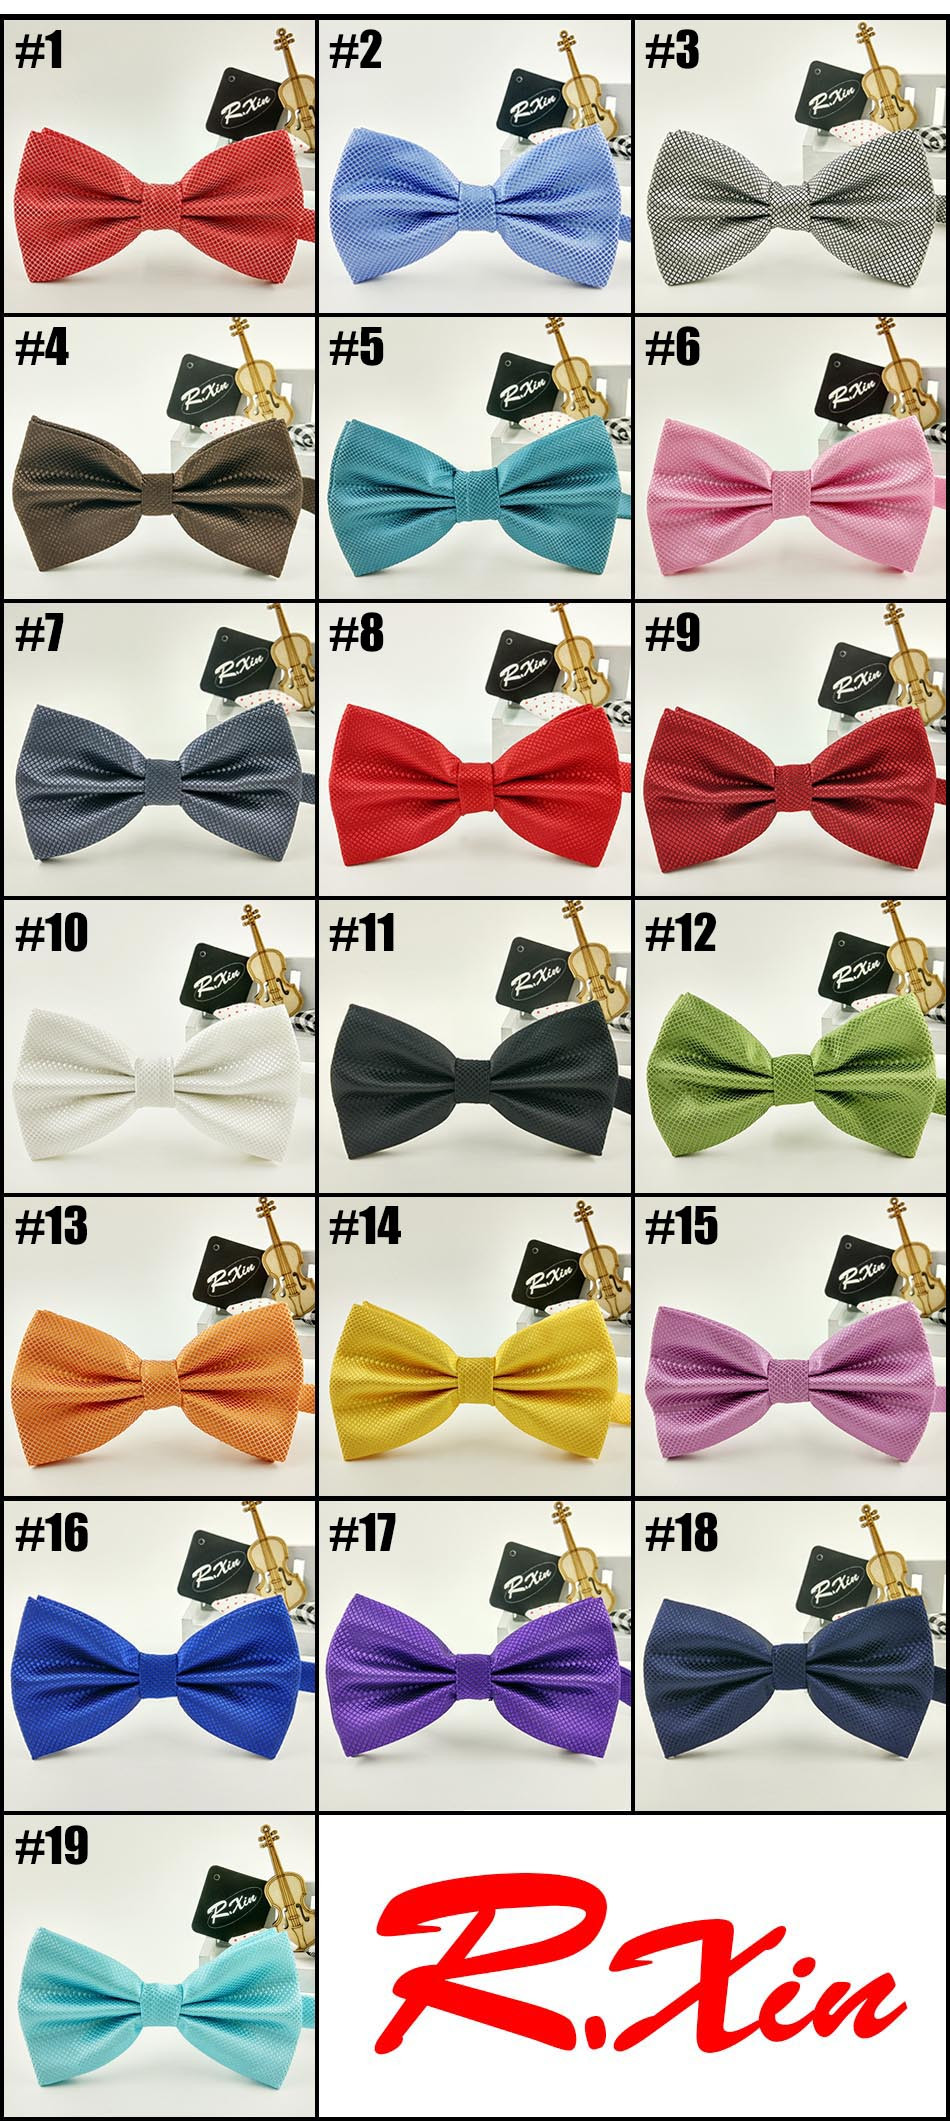 New-2016-fashion-bow-tie-pocket-married-bow-ties-male-bow-candy-color-butterfly-ties-for-men-women-m-32434650789